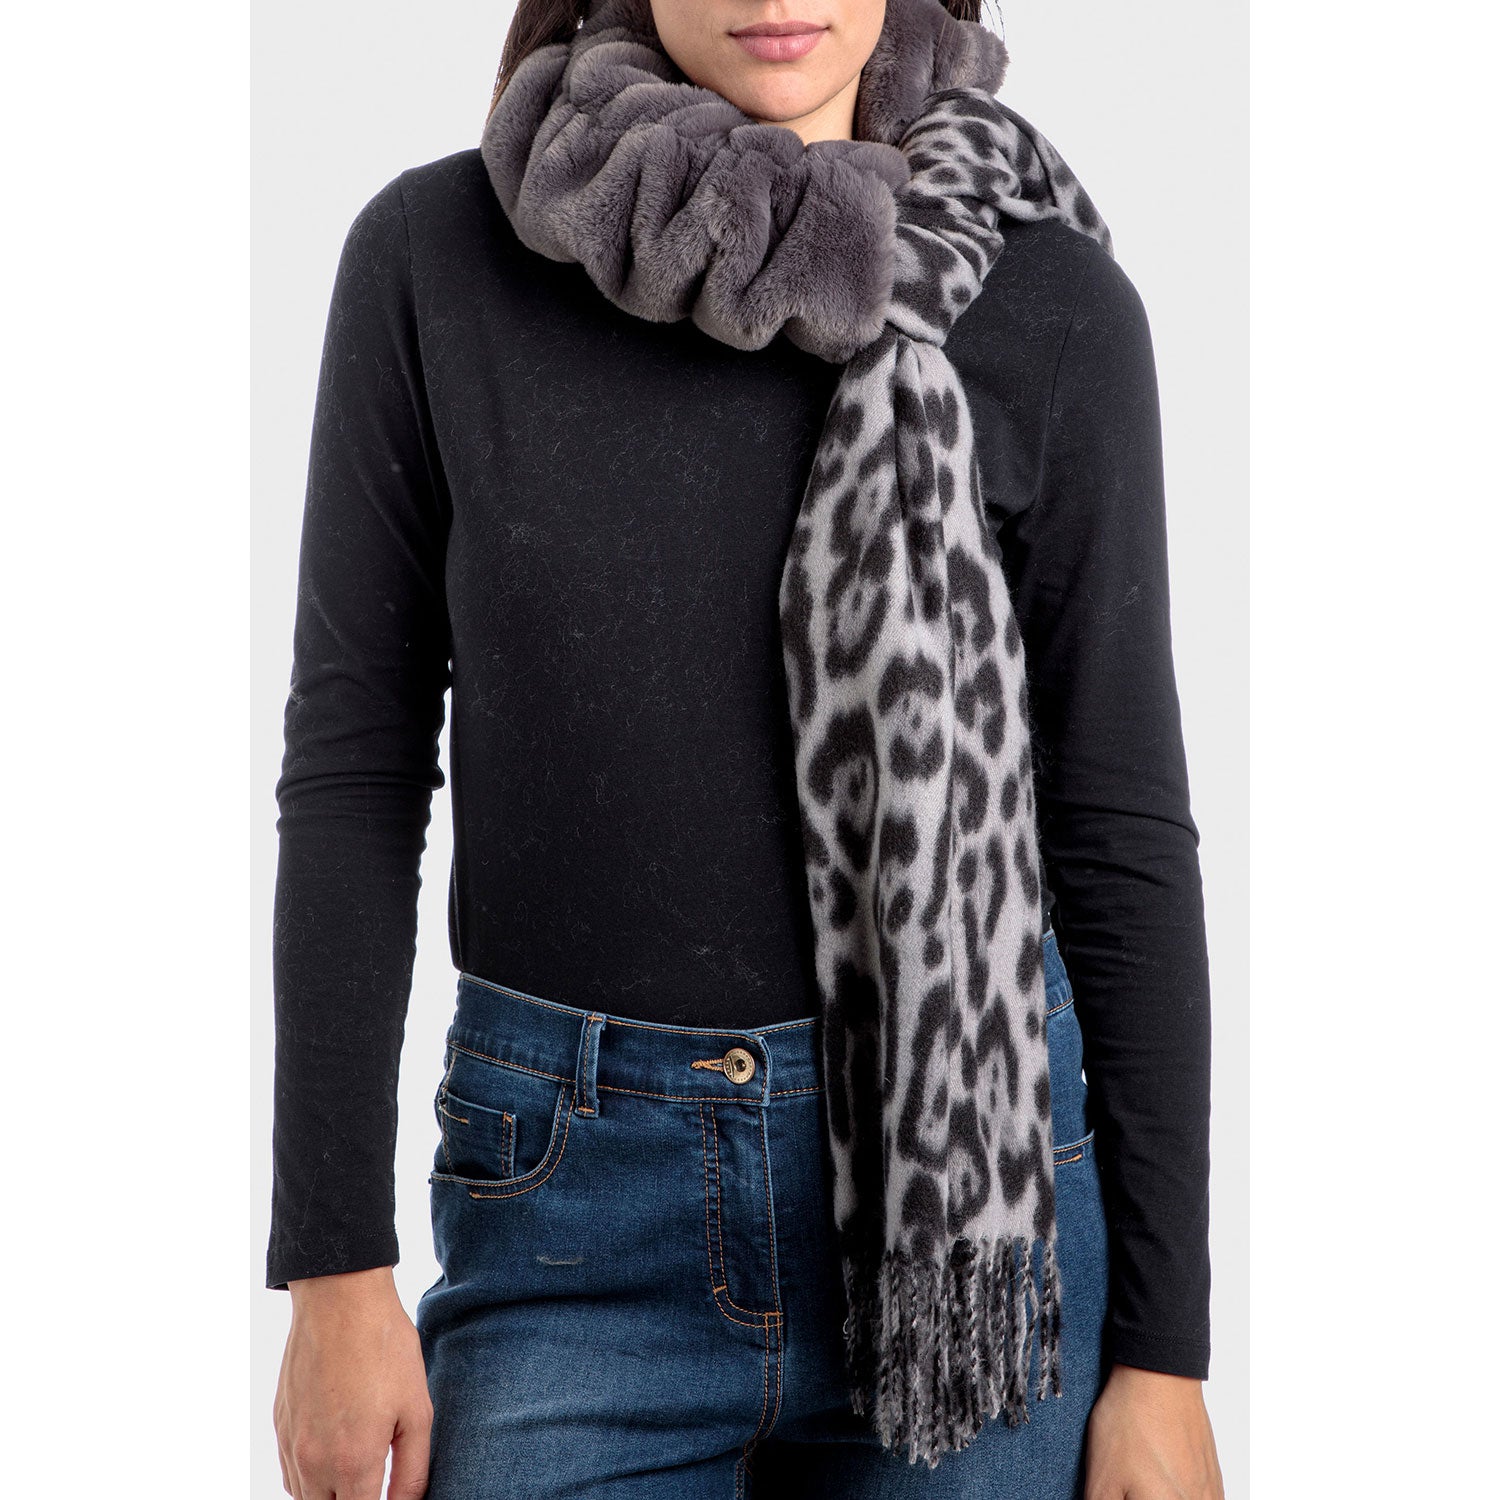 Punt Roma Scarf with Fur Collar - Grey 1 Shaws Department Stores